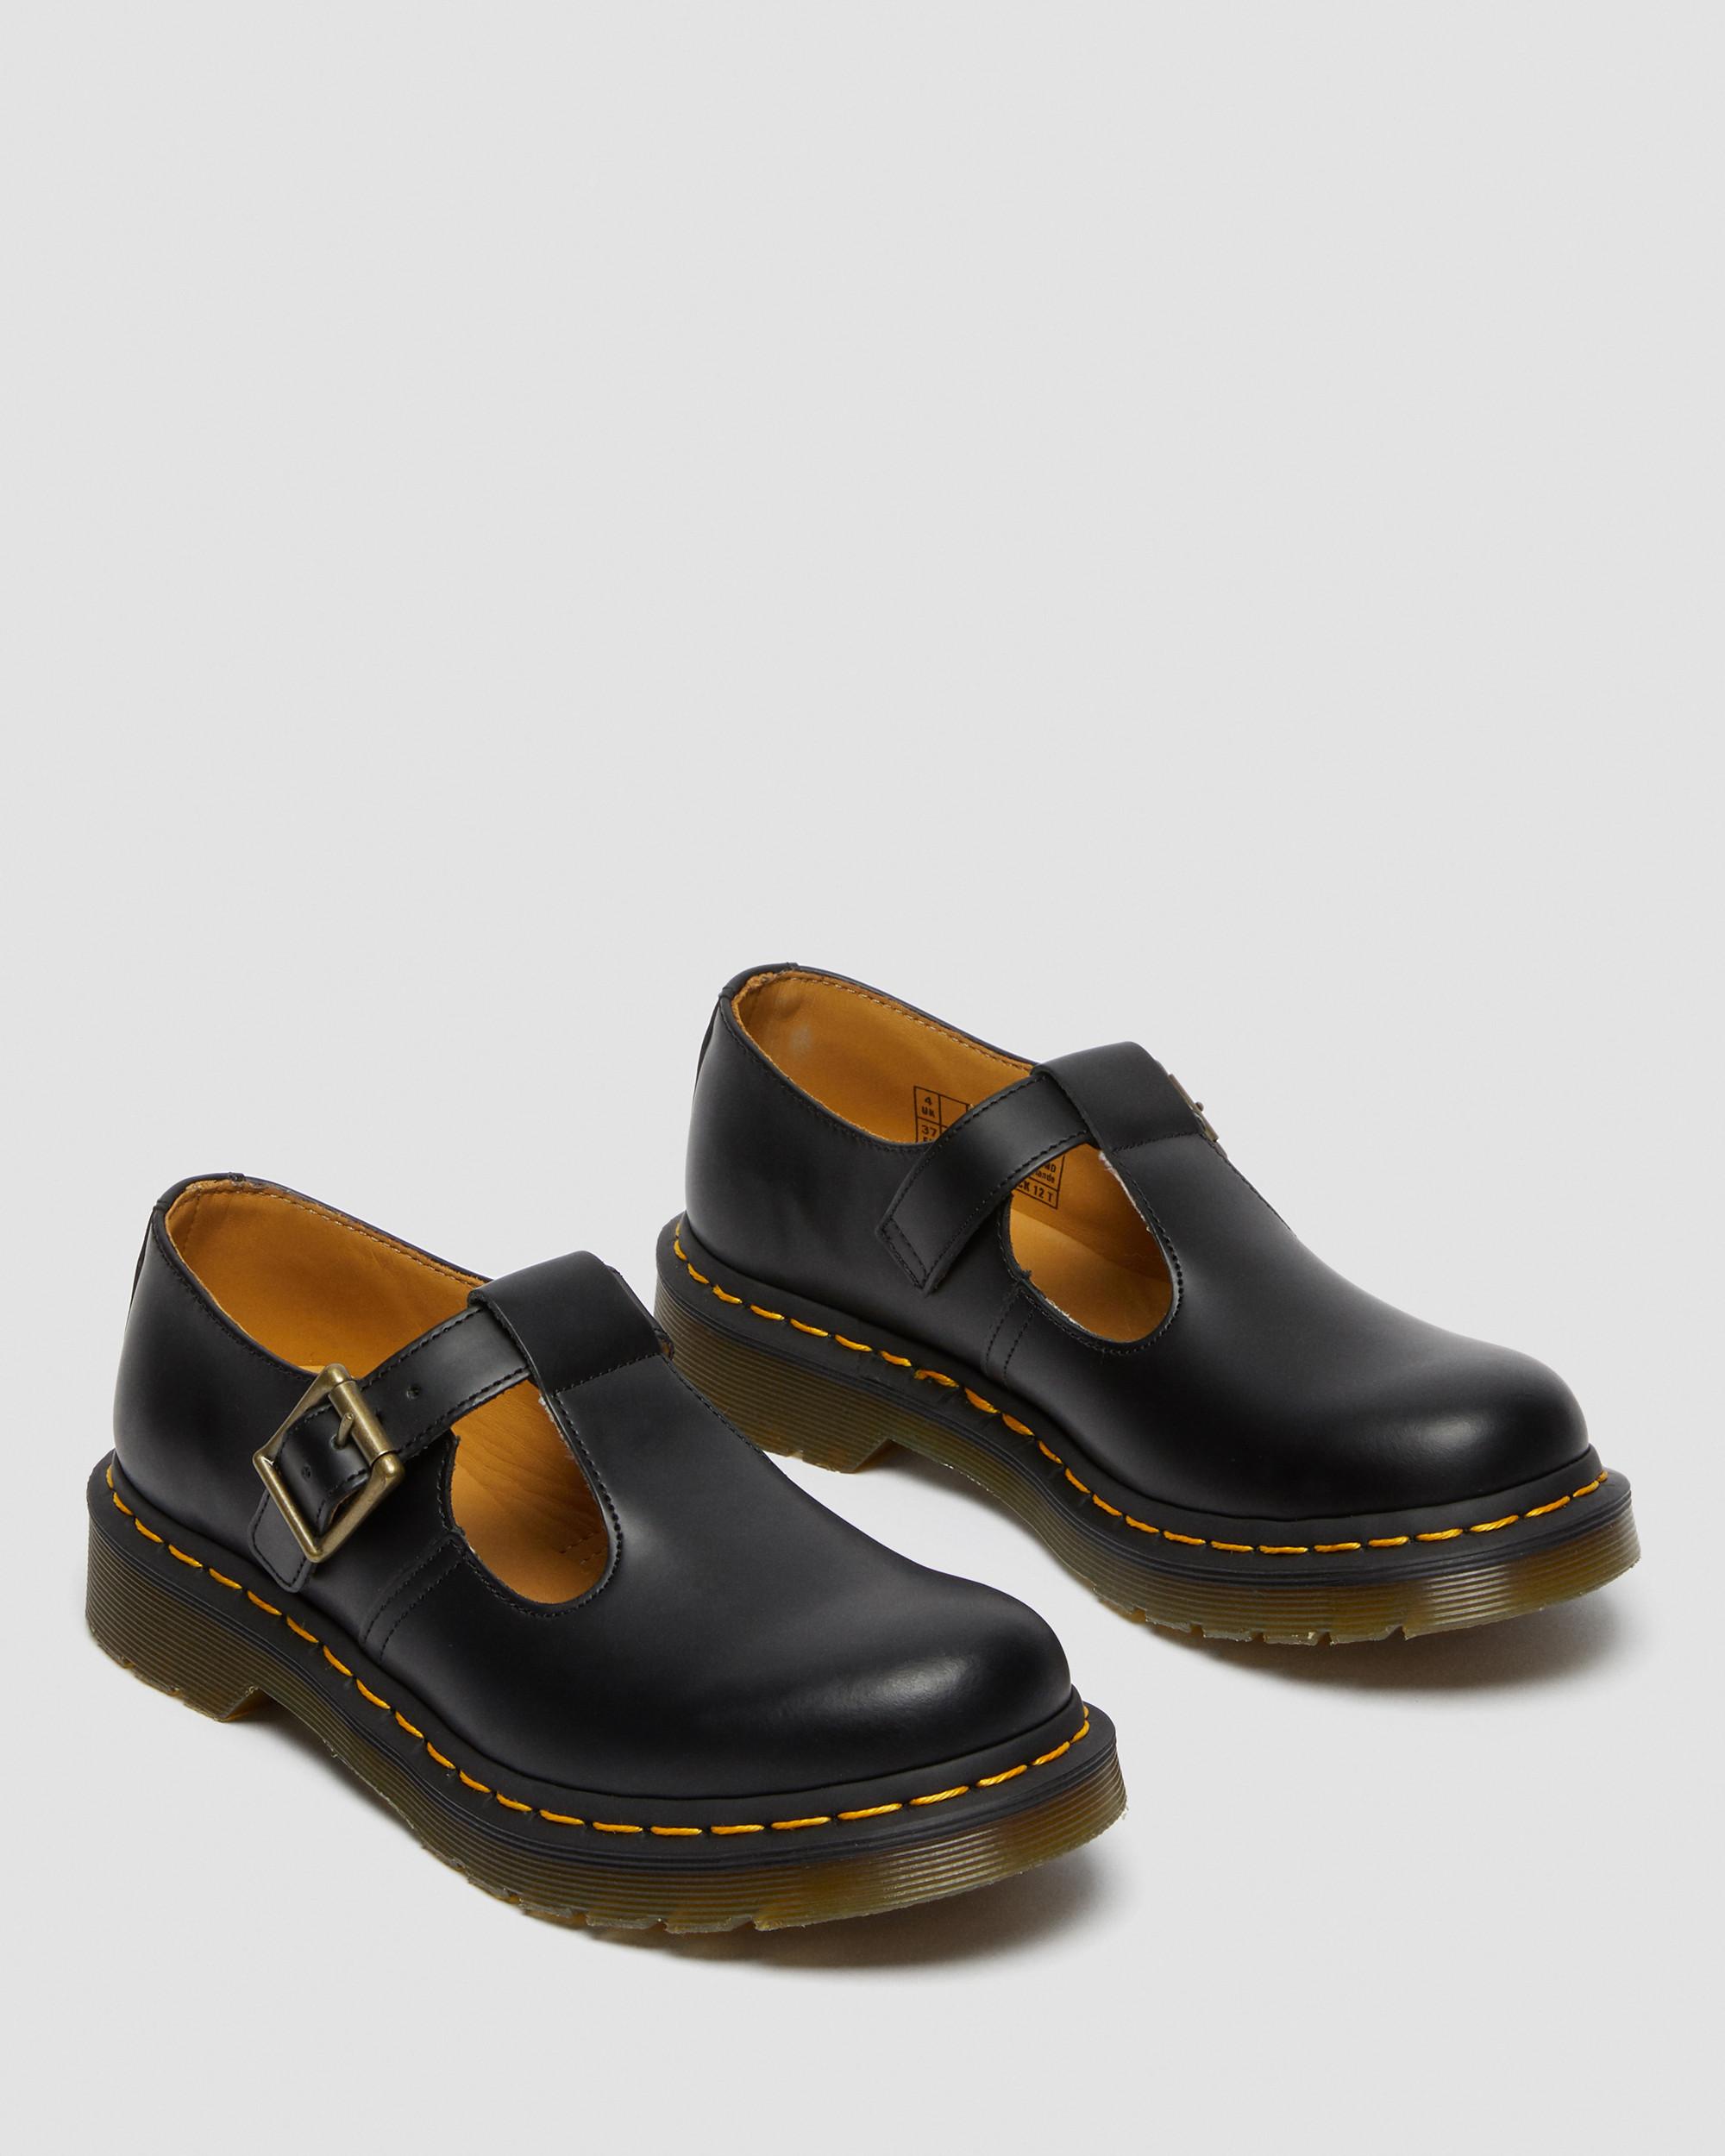 dr martens t bar mary jane